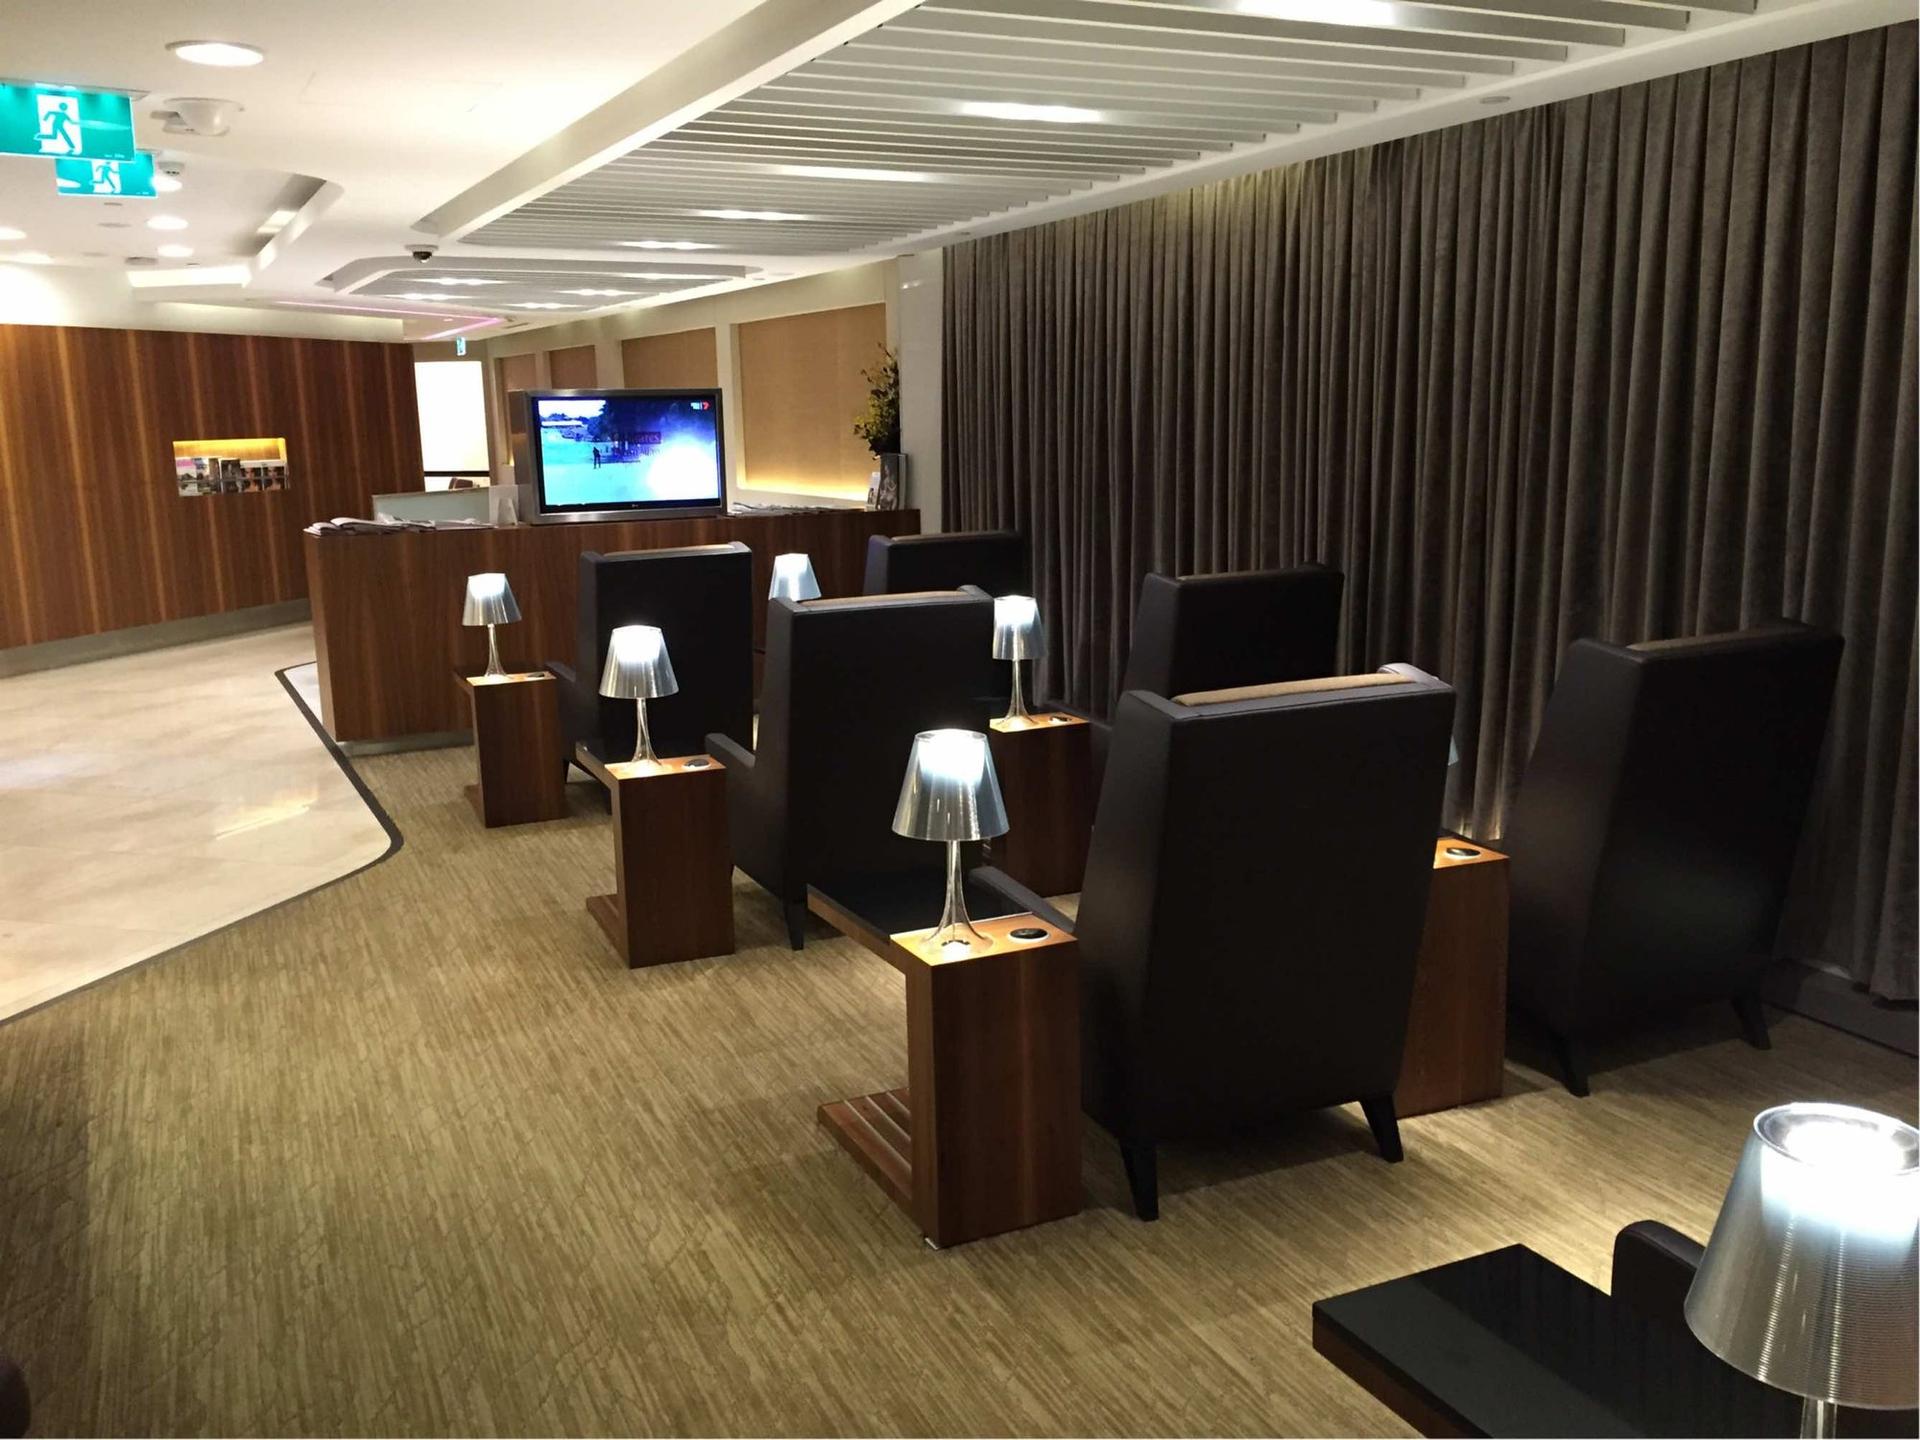 Singapore Airlines SilverKris First Class Lounge image 3 of 7